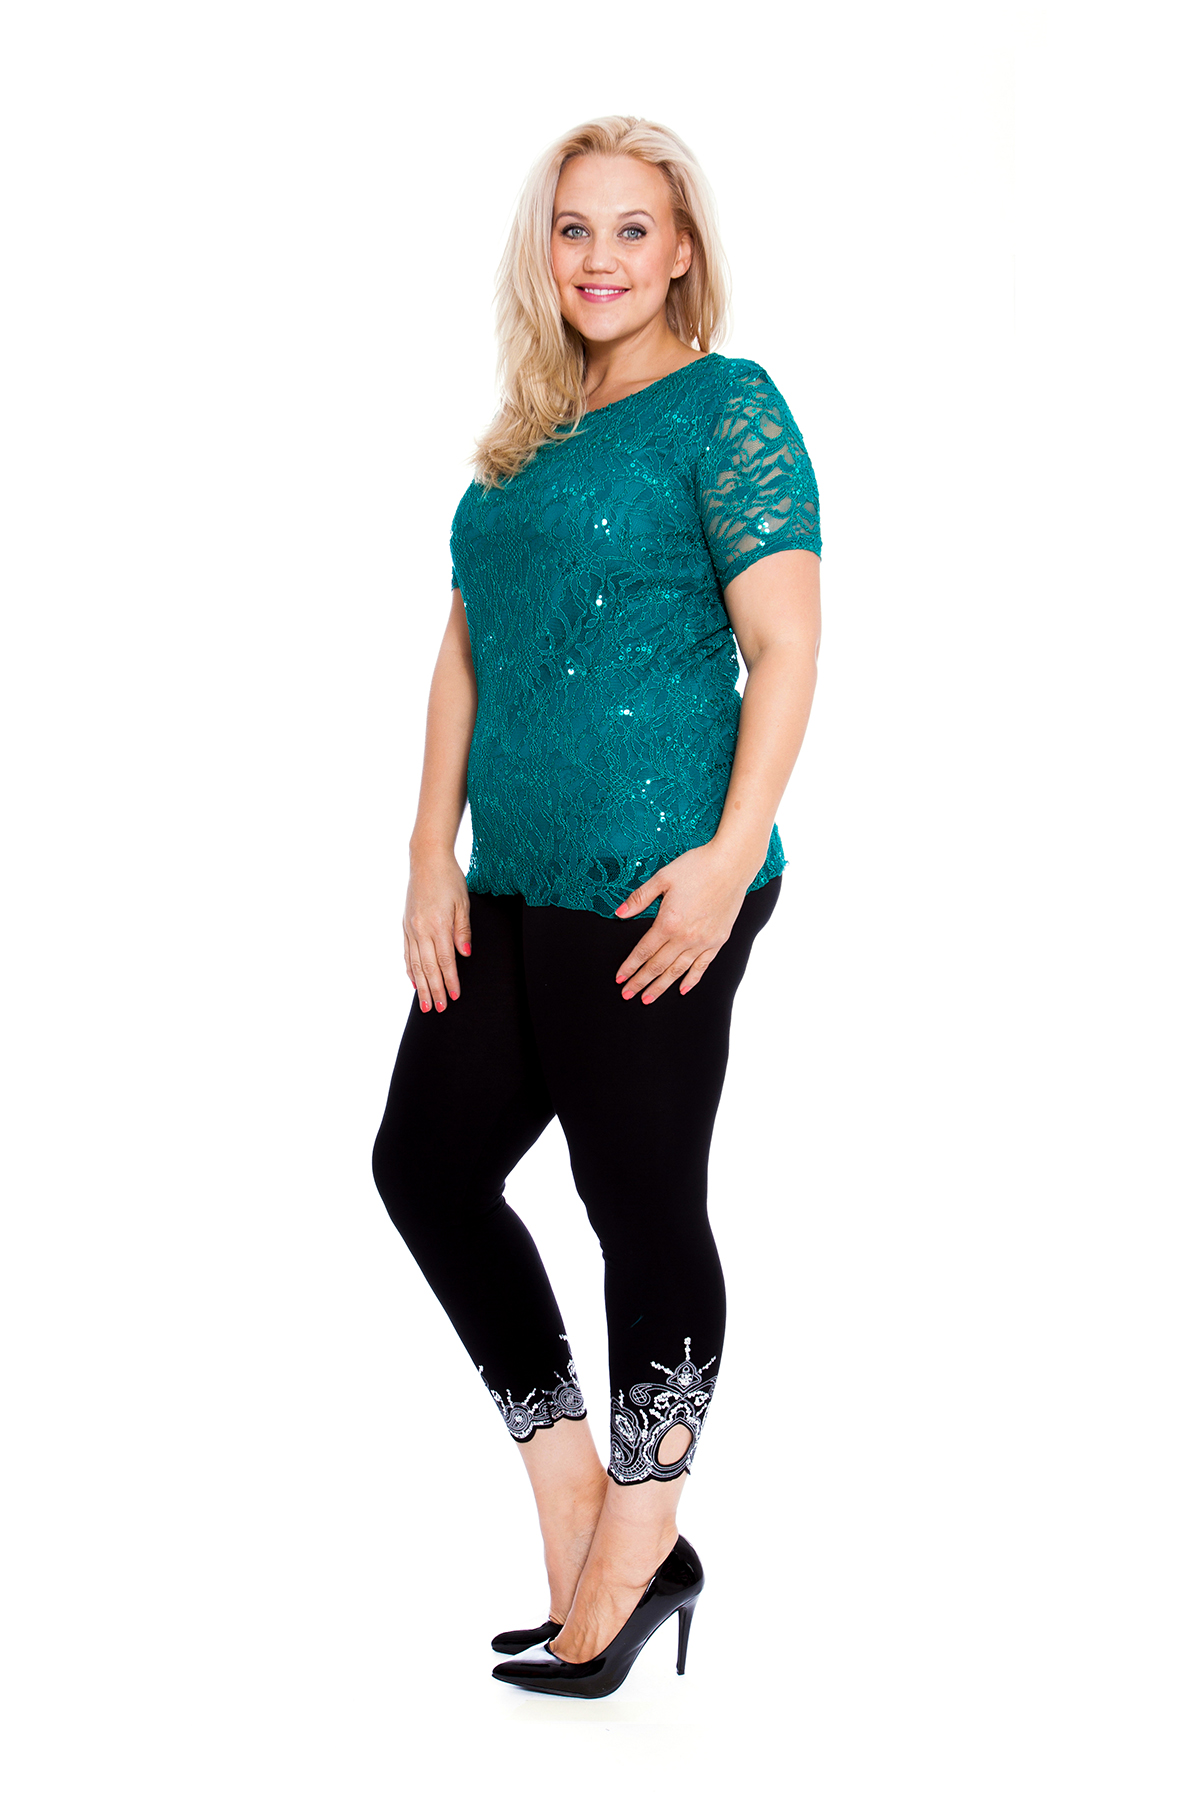 New Womens Top Plus Size Ladies Shirt Tunic Floral Lace Sequins Party ...